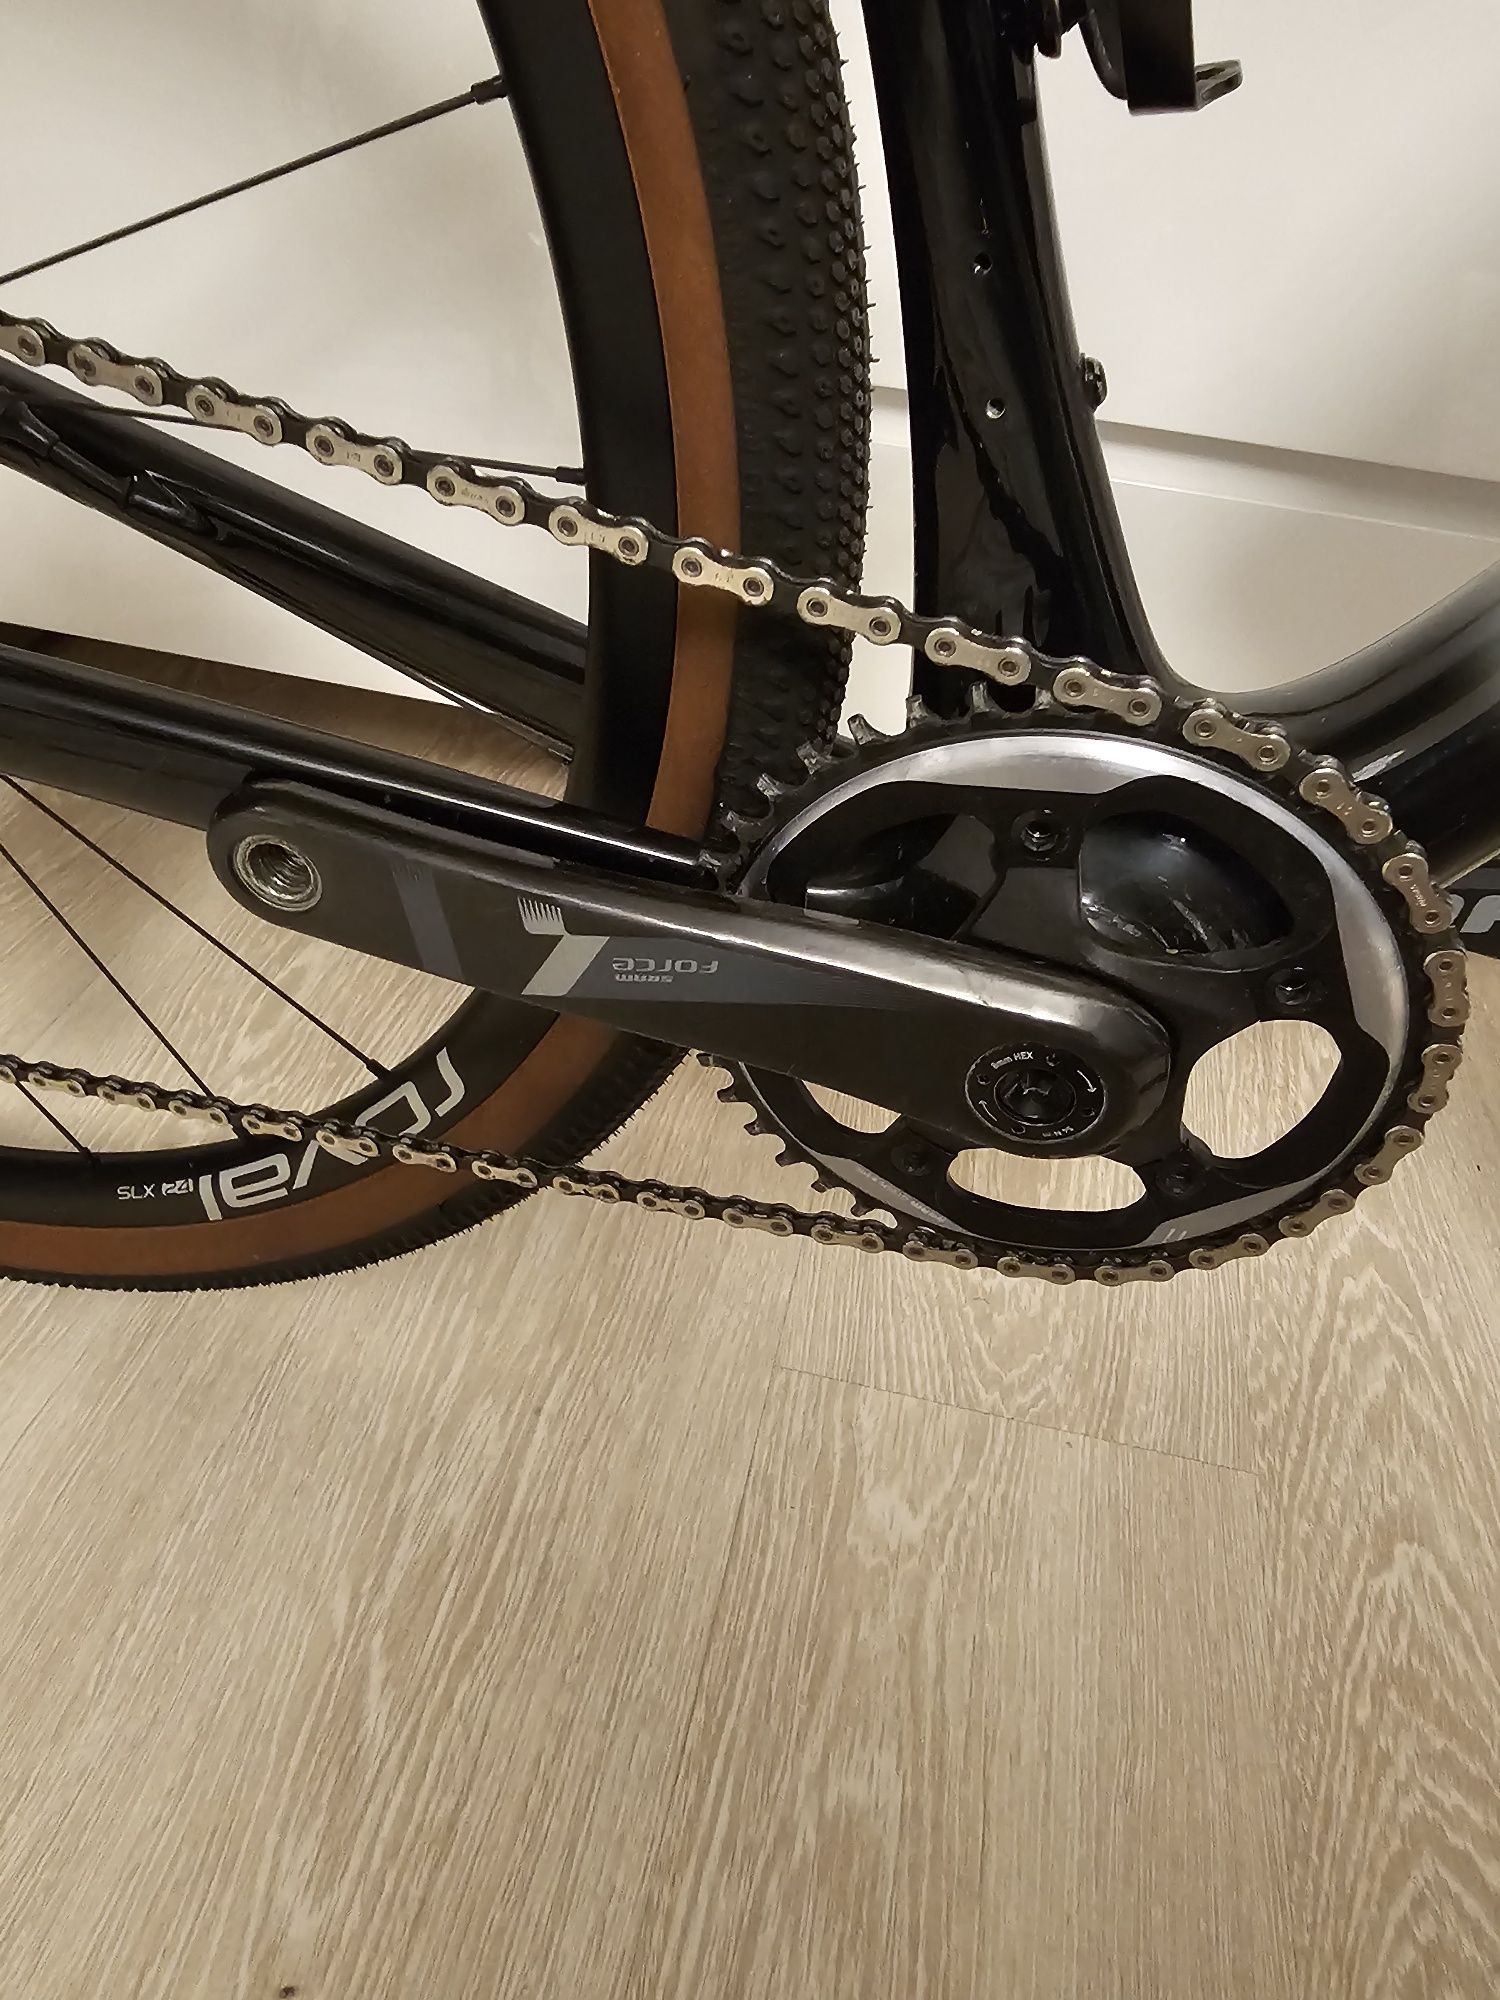 Gravel Specialized Diverge Sram Force